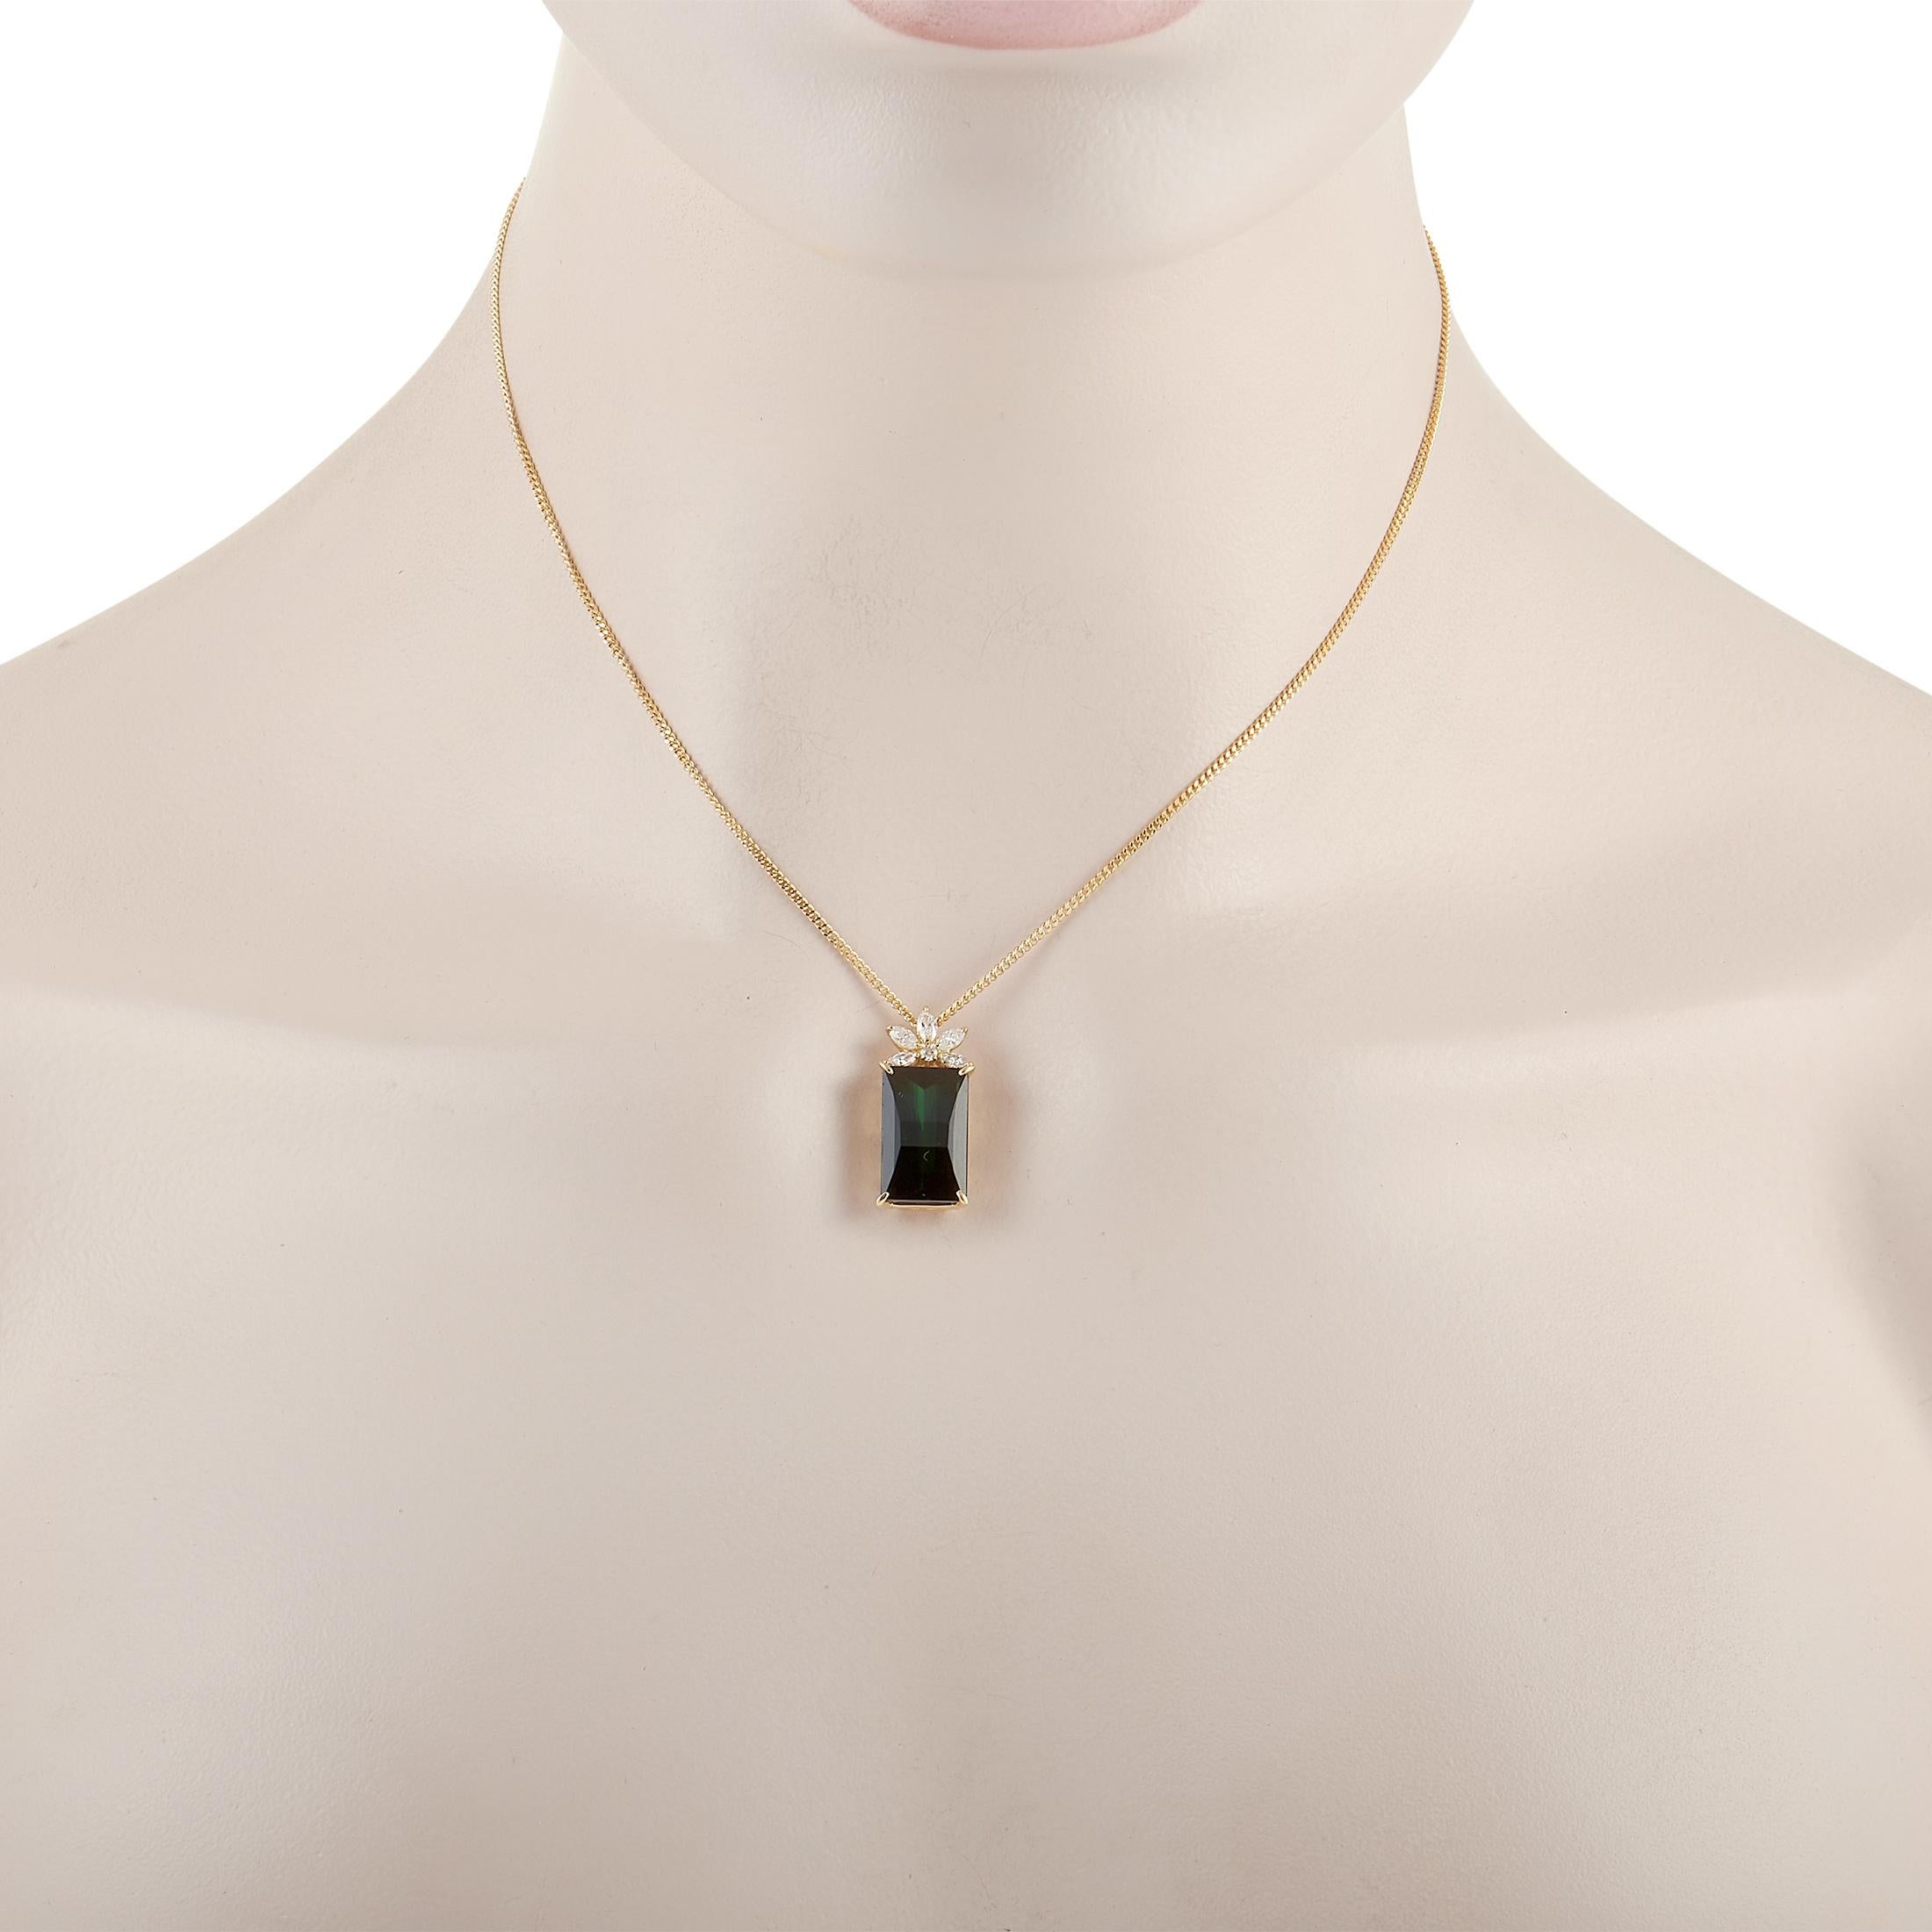 There’s something inherently regal about this exceptional pendant necklace. Suspended upon a 15” chain with ring clasp closure, you’ll find a stylish pendant that measures 0.88” long and 0.38” wide. On it, you’ll find a green rectangular 6.83 carat